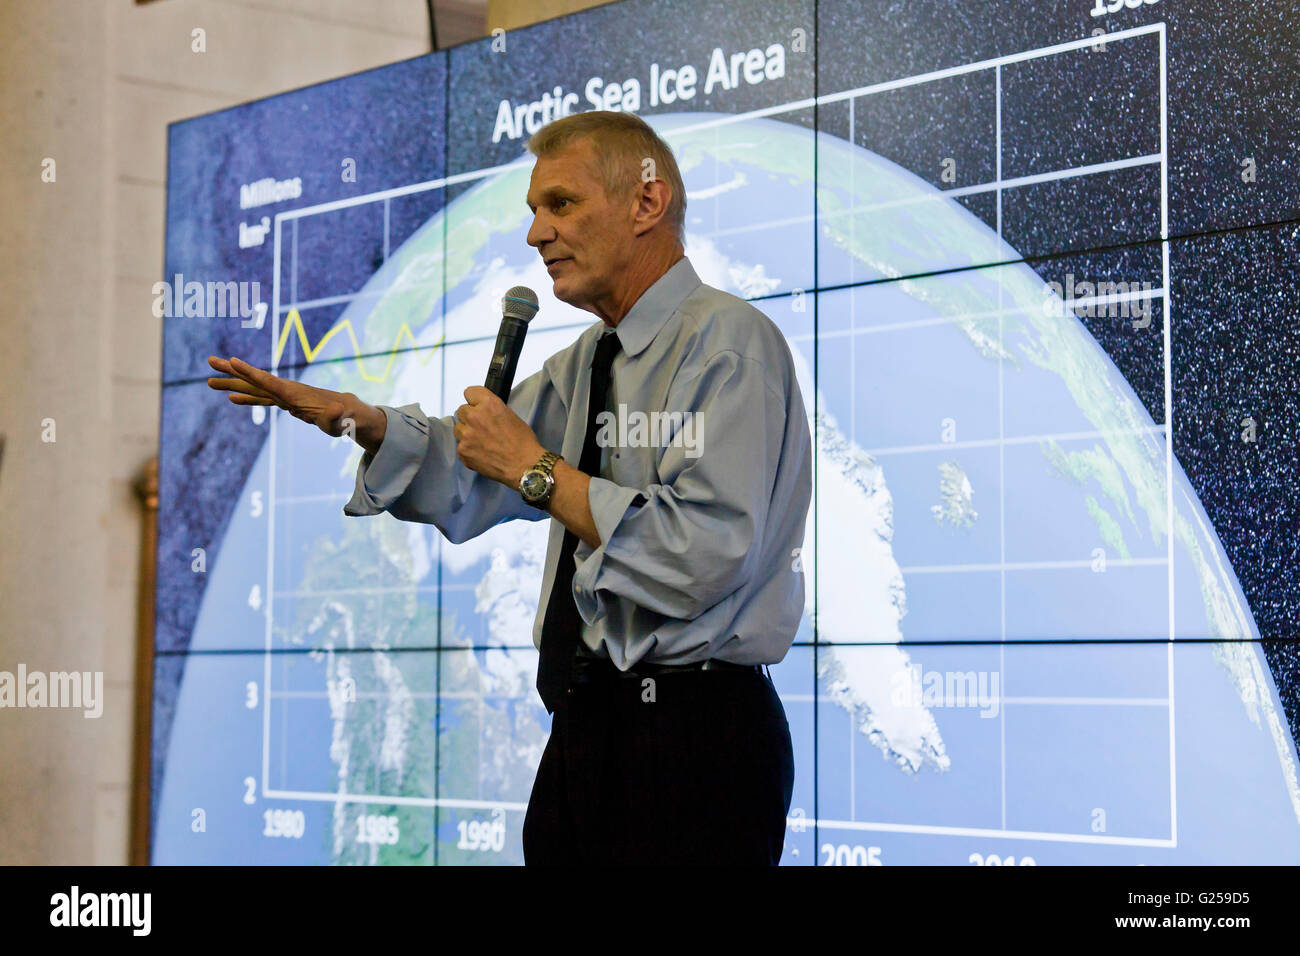 Washington DC, USA. 22nd Apr, 2016. NASA celebrates Earth day with the public in Union Station in Washington, DC - Pictured: astronaut Piers Sellers Stock Photo